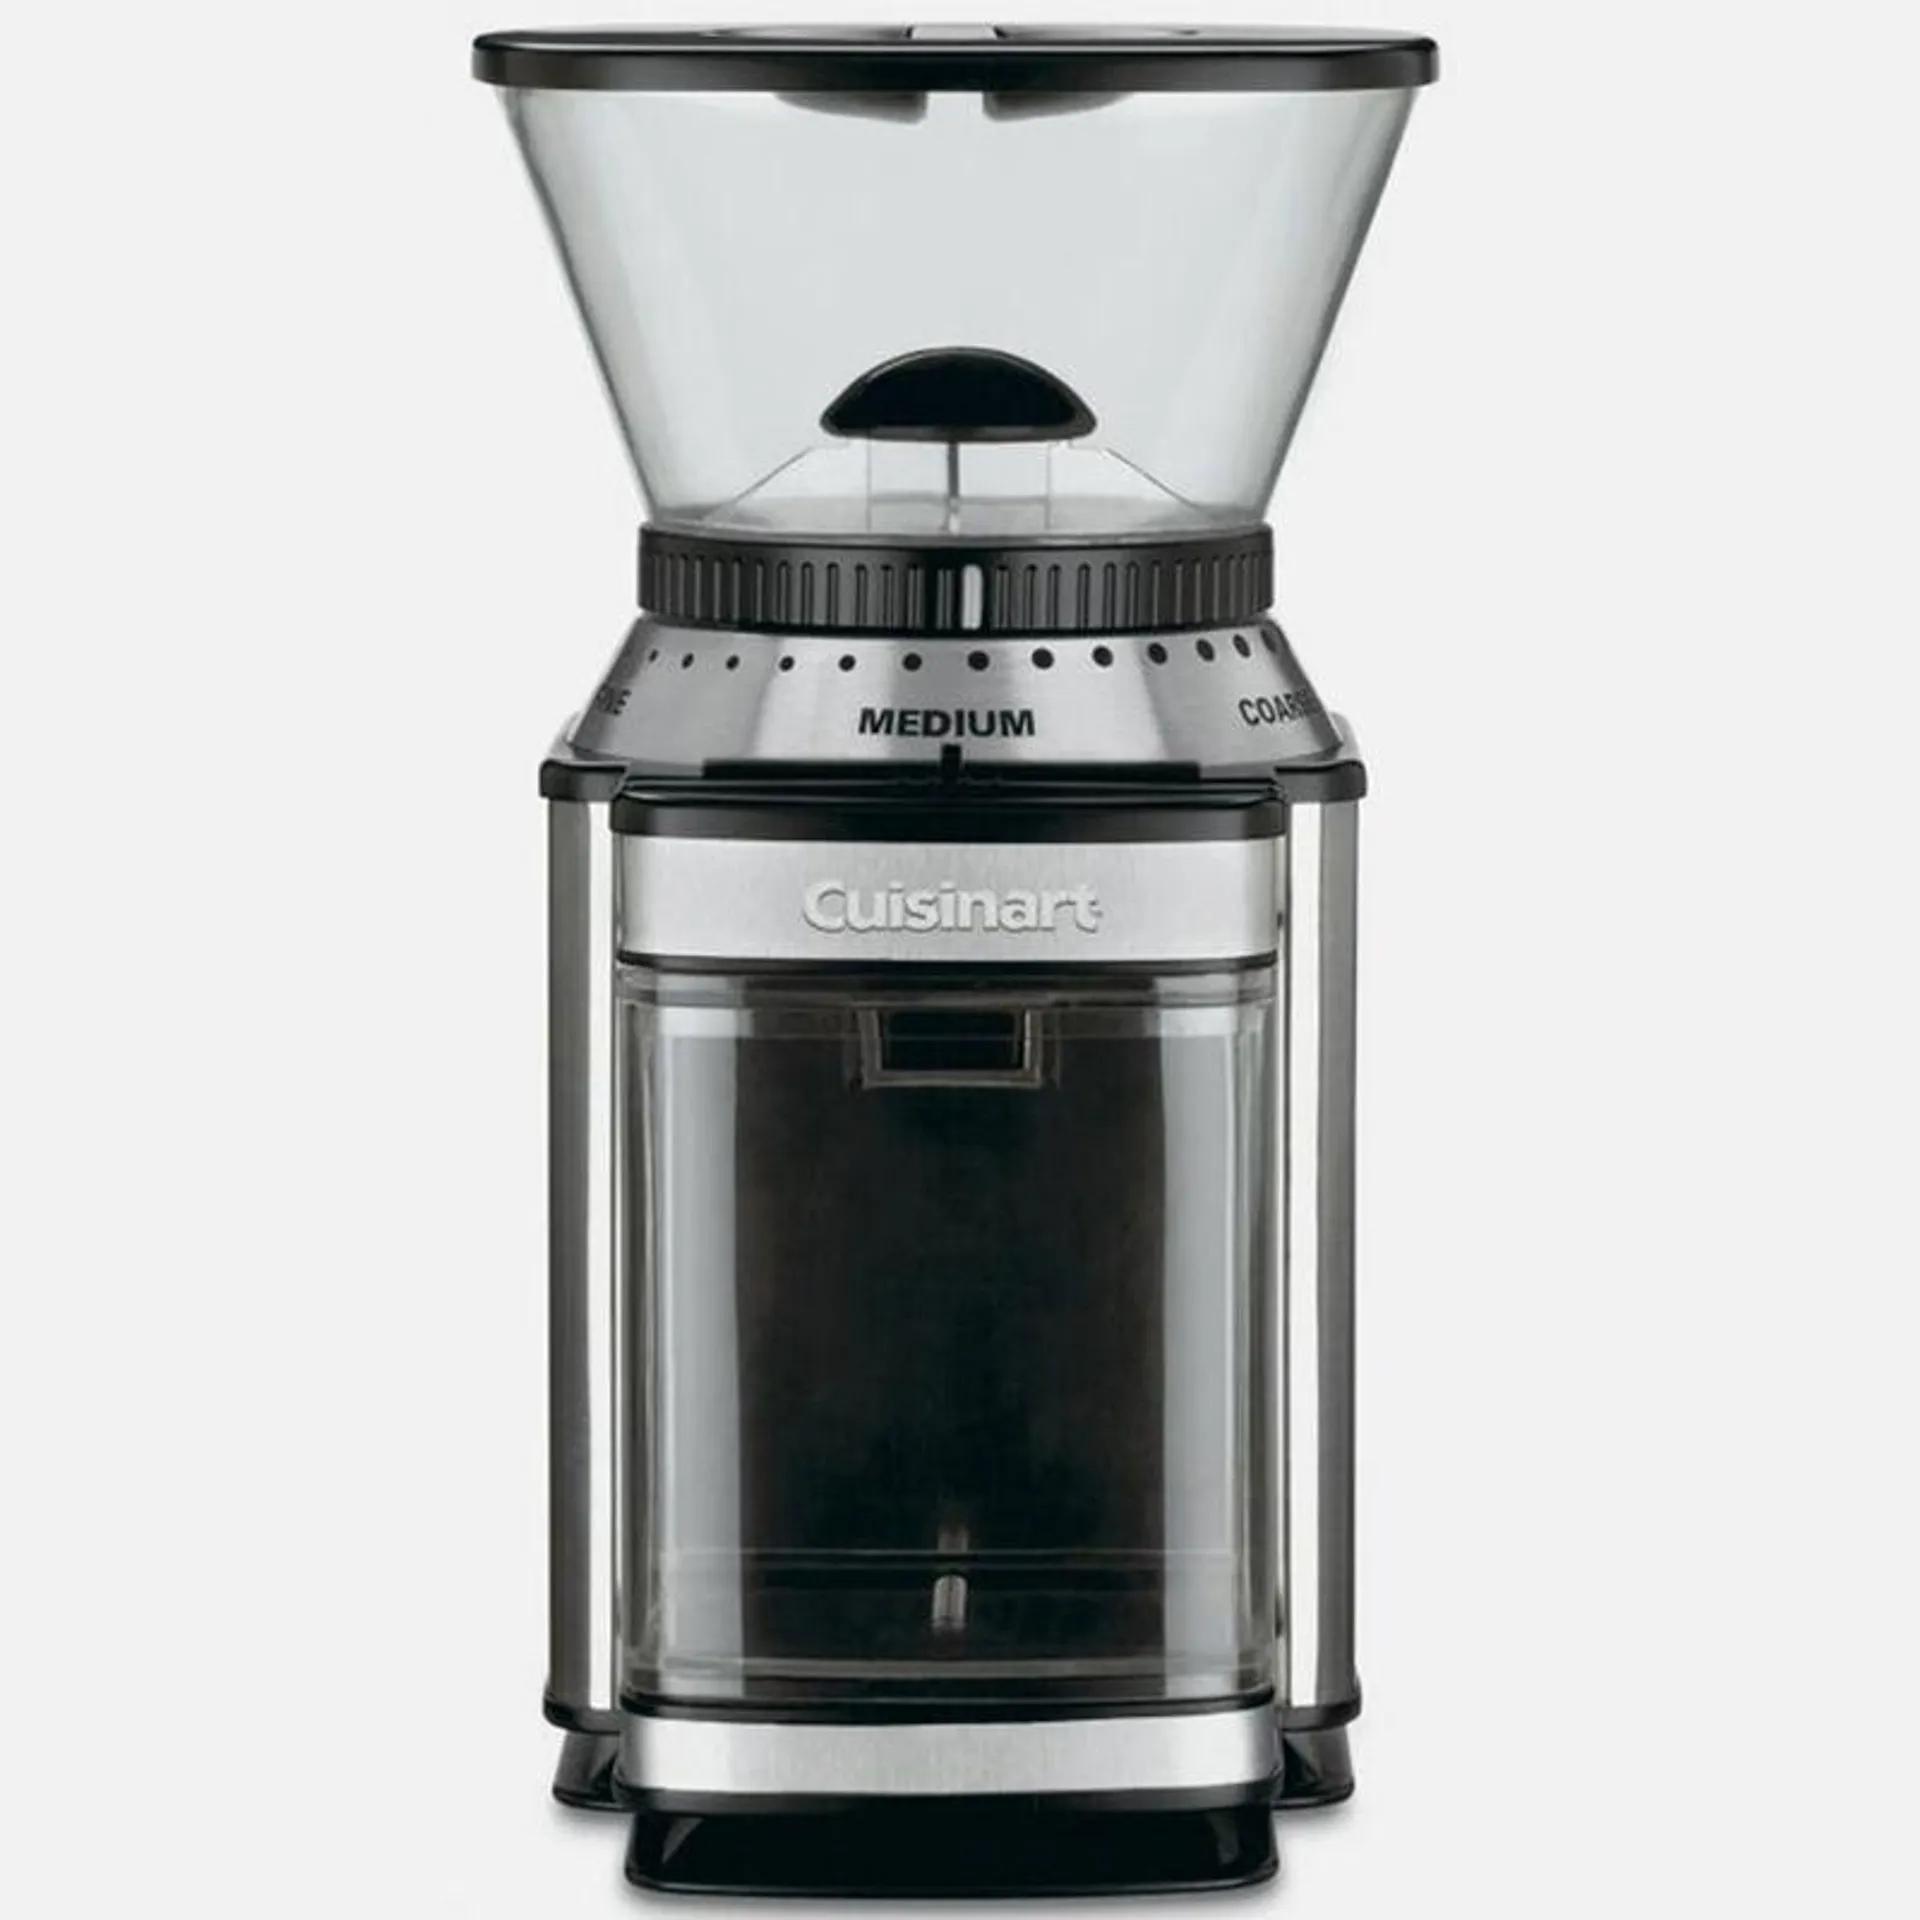 Cuisinart Supreme Grind Automatic Burr Mill - Black Stainless